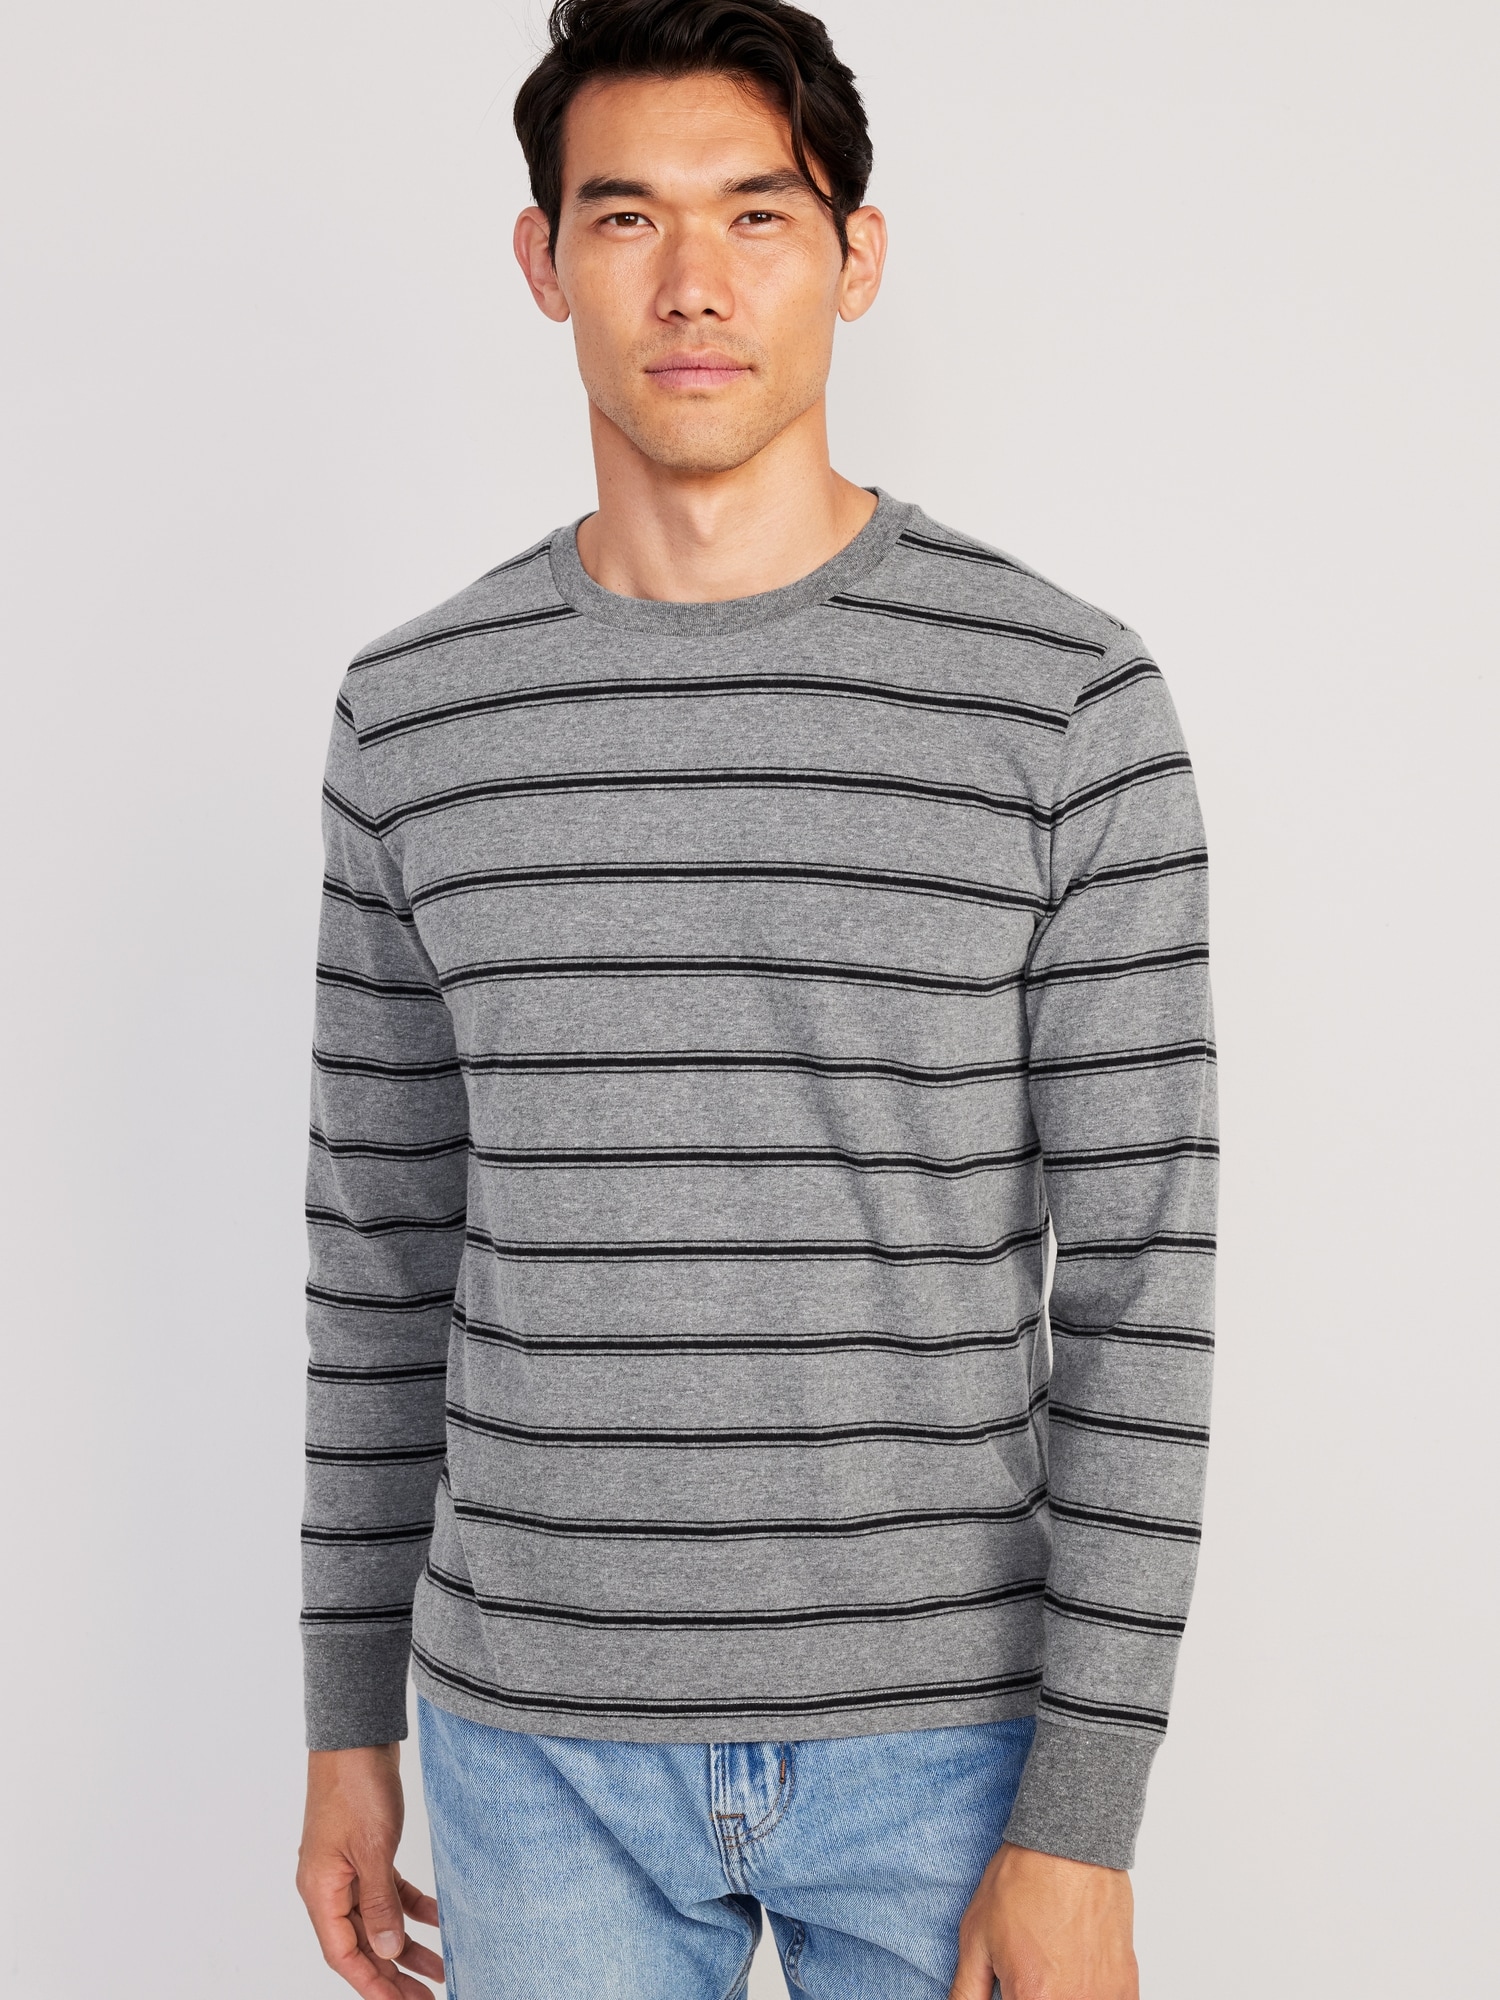 Old Navy Men's Long-Sleeve Striped Rotation T-Shirt - - Size L